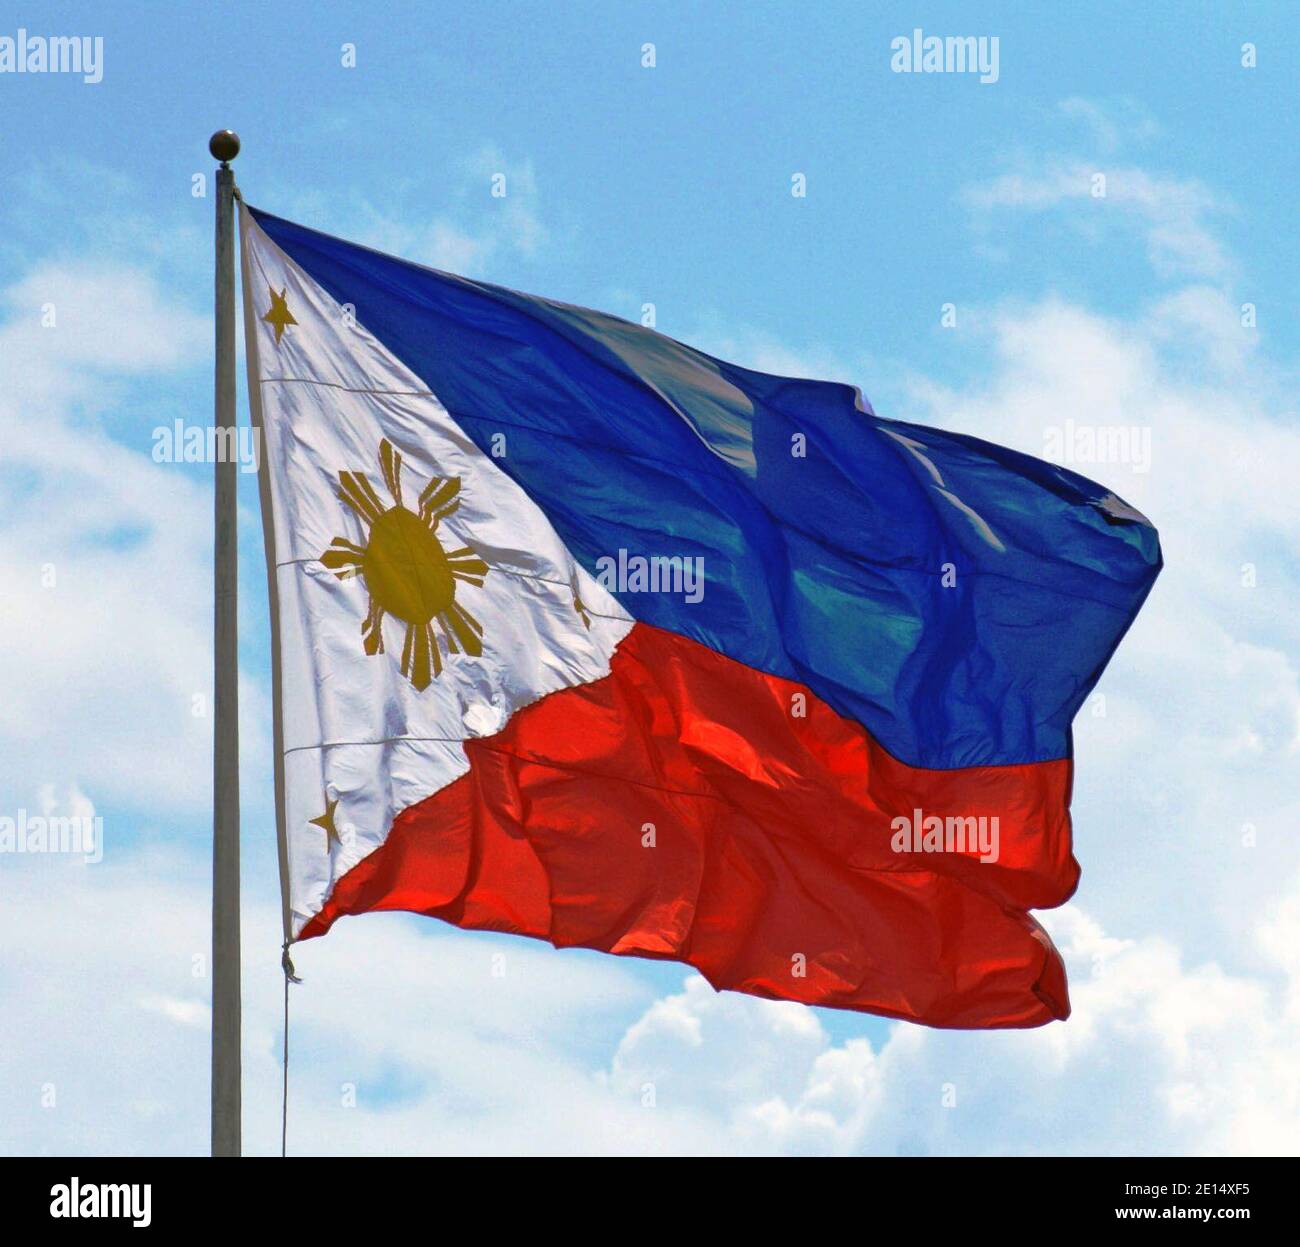 The national flag of the Republic of the Philippines on a flag pole in the capital Manila.  The royal blue represents peace, truth, and justice while the crimson red represents patriotism and valor.  The equilateral triangle represents liberty, equality, and fraternity.  The large sun has 8 rays representing the 8 provinces that revolted against Spain.  The three small stars represent the three large islands of Luzon, Visayas, and Mindanao. Stock Photo